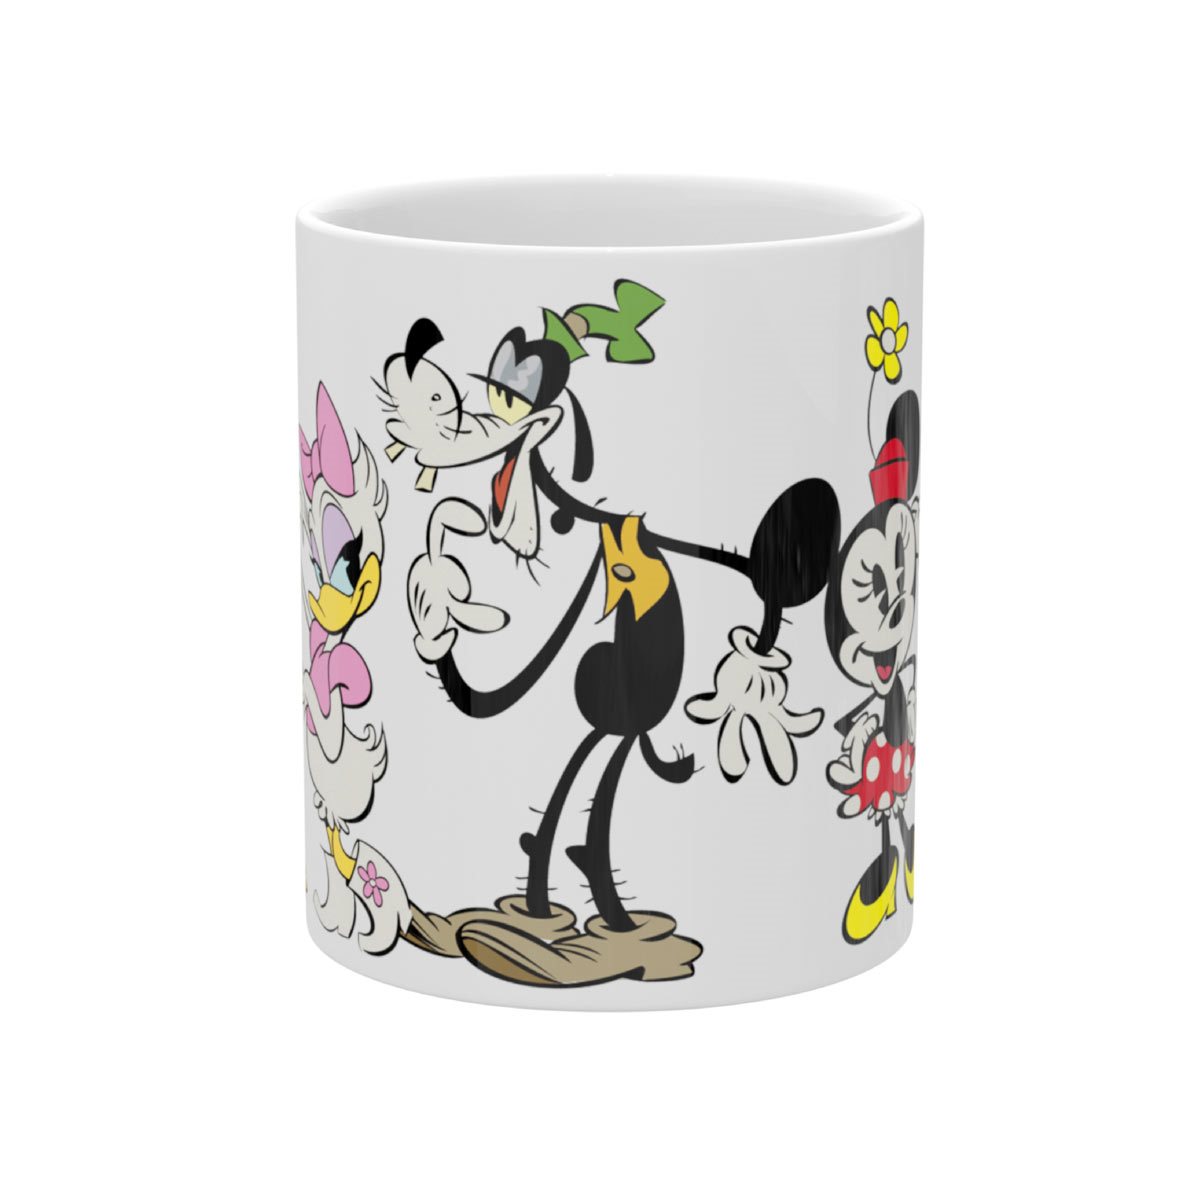 1 Gal Chicago Cubs Mickey Mouse – The Popcorn Store